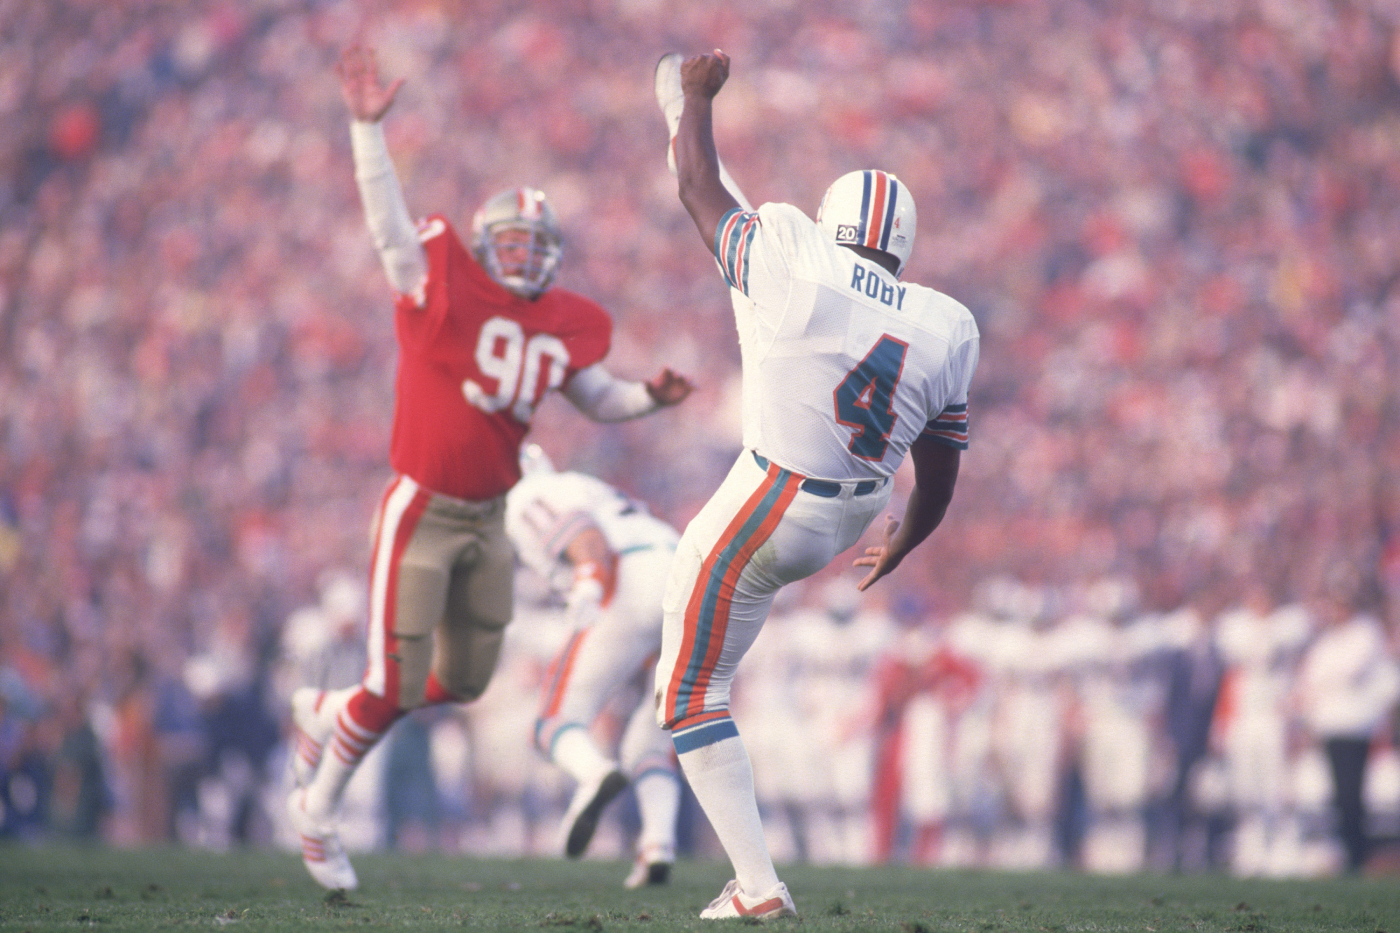 Reggie Roby was a very successful punter for the Miami Dolphins and broke down color barriers in the NFL. He, however, sadly died too young.